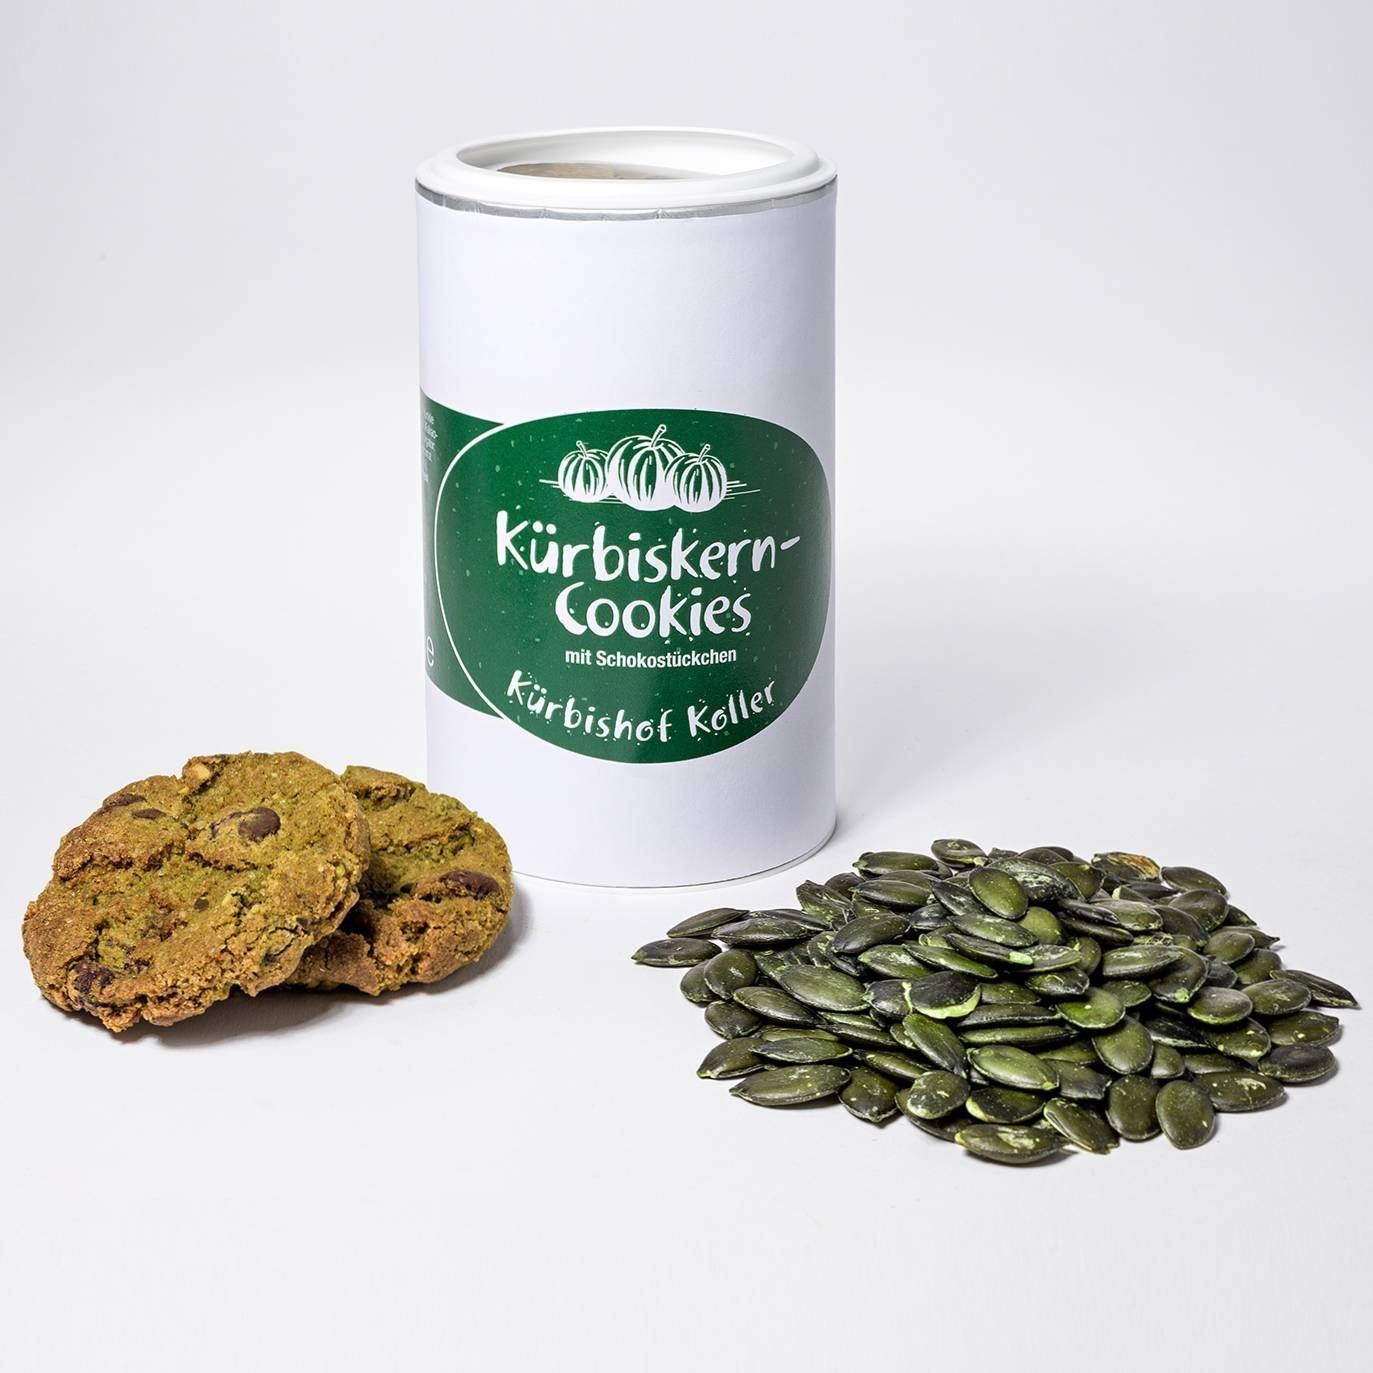 Pumpkin Seed Cookies with Chocolate Chips in the Democratic Republic of Congo